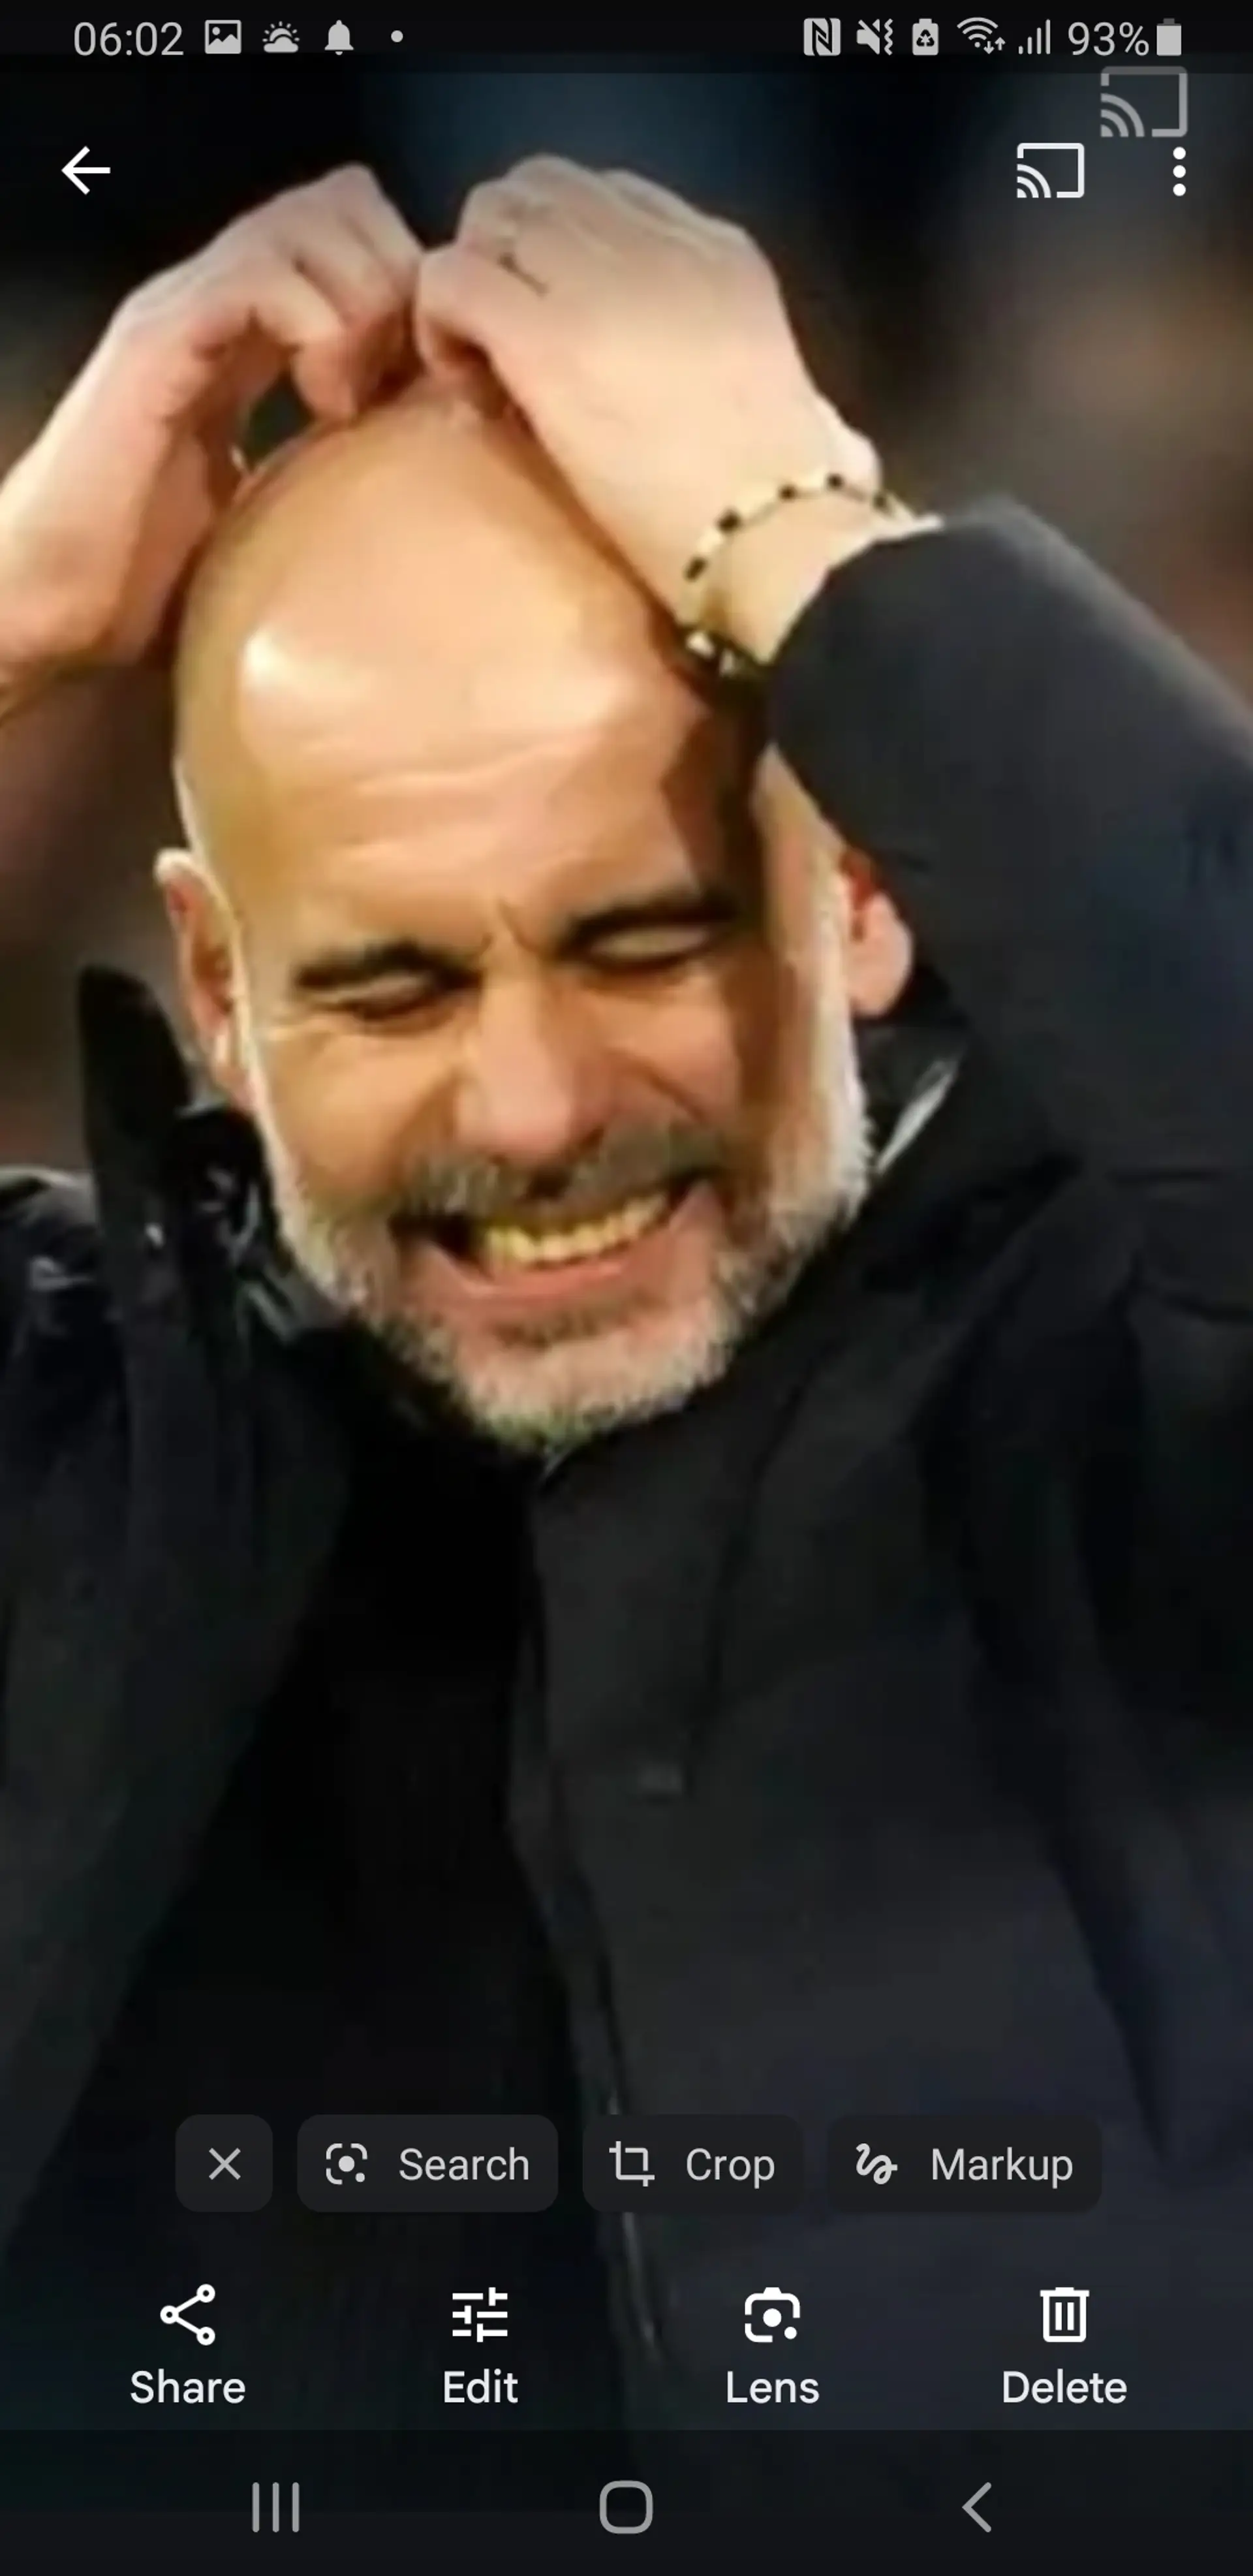 PEP  To run and hide now expulsion for Man City arrive. They are finally looking into 115 charges and now they have turned the 1st page Pep decides to leave. Is that a sign of a guilty man I ask myself. Not a true team manager who would stand by there team and take the punishment together. If that was Arsen or Alex fergerson they would stay by there team and take whats to come not run and hide.